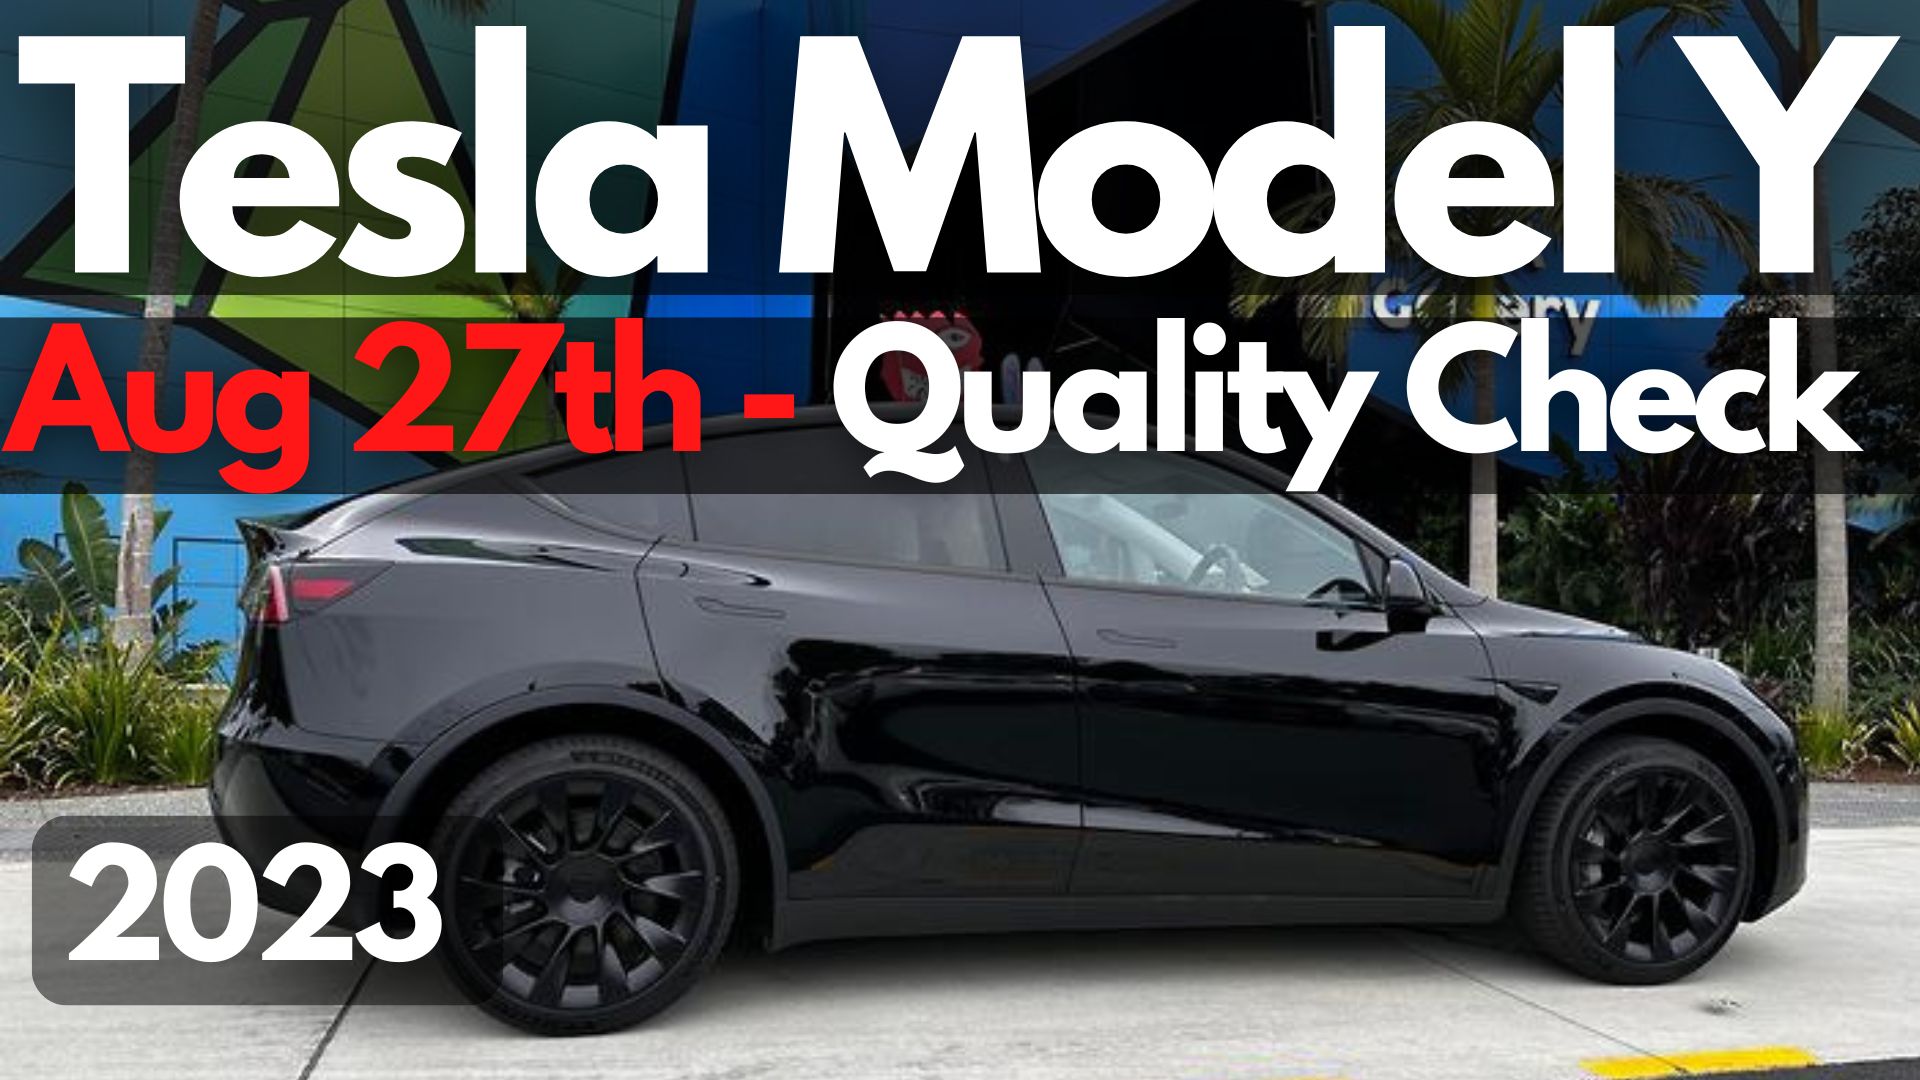 Has Tesla Improved The Model Y Build Quality For Aug 27, 2023?